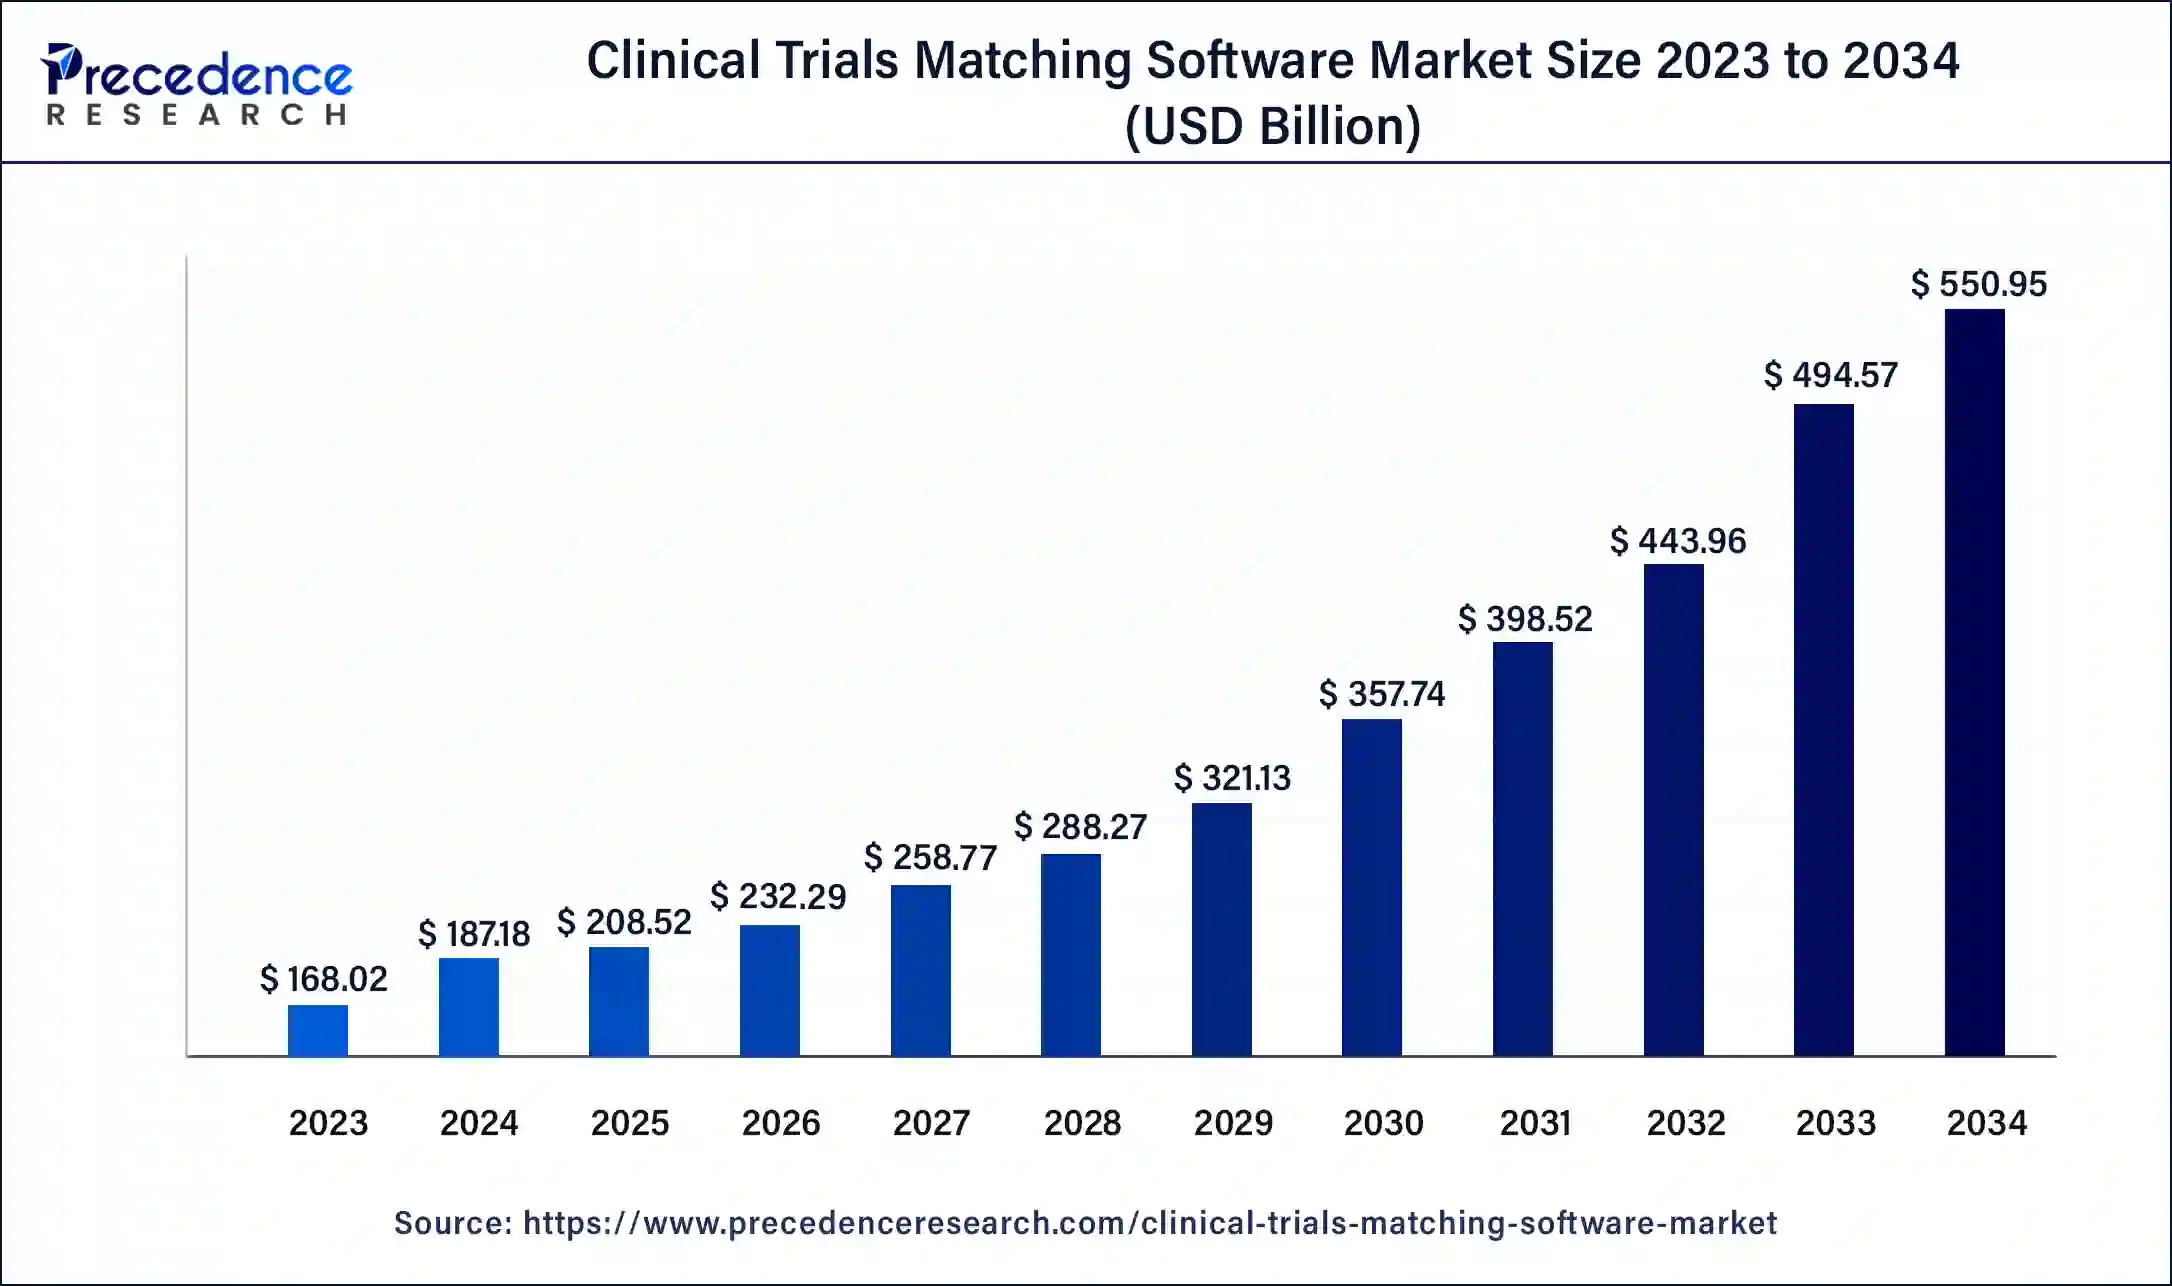 Clinical Trials Matching Software Market Size 2024 to 2034